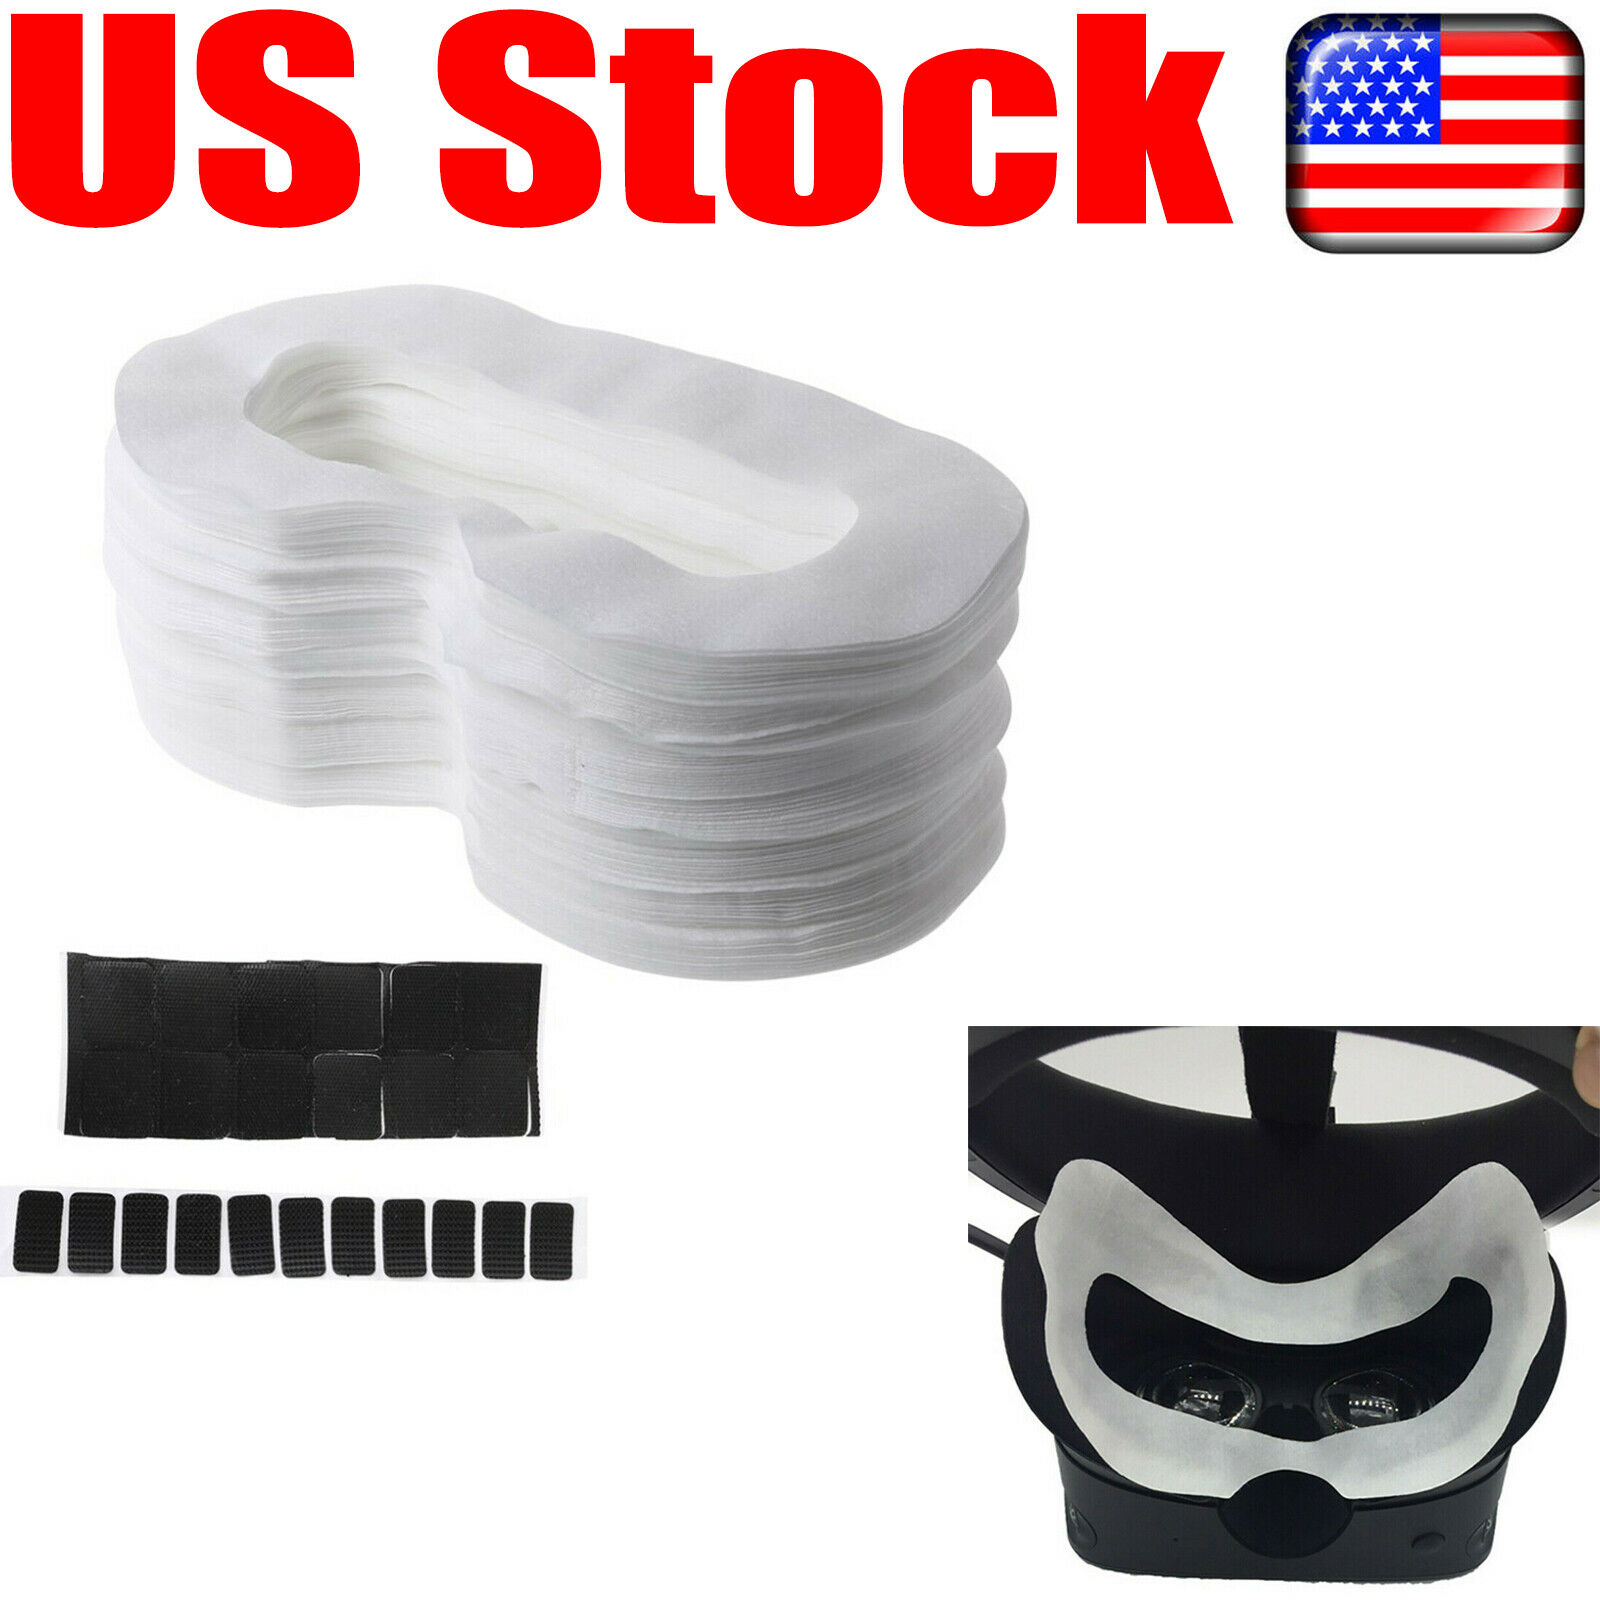 100pcs Eye Masks Hygienic Pad For Oculus Quest 2all-in-one Gaming Vr Glasses Usa